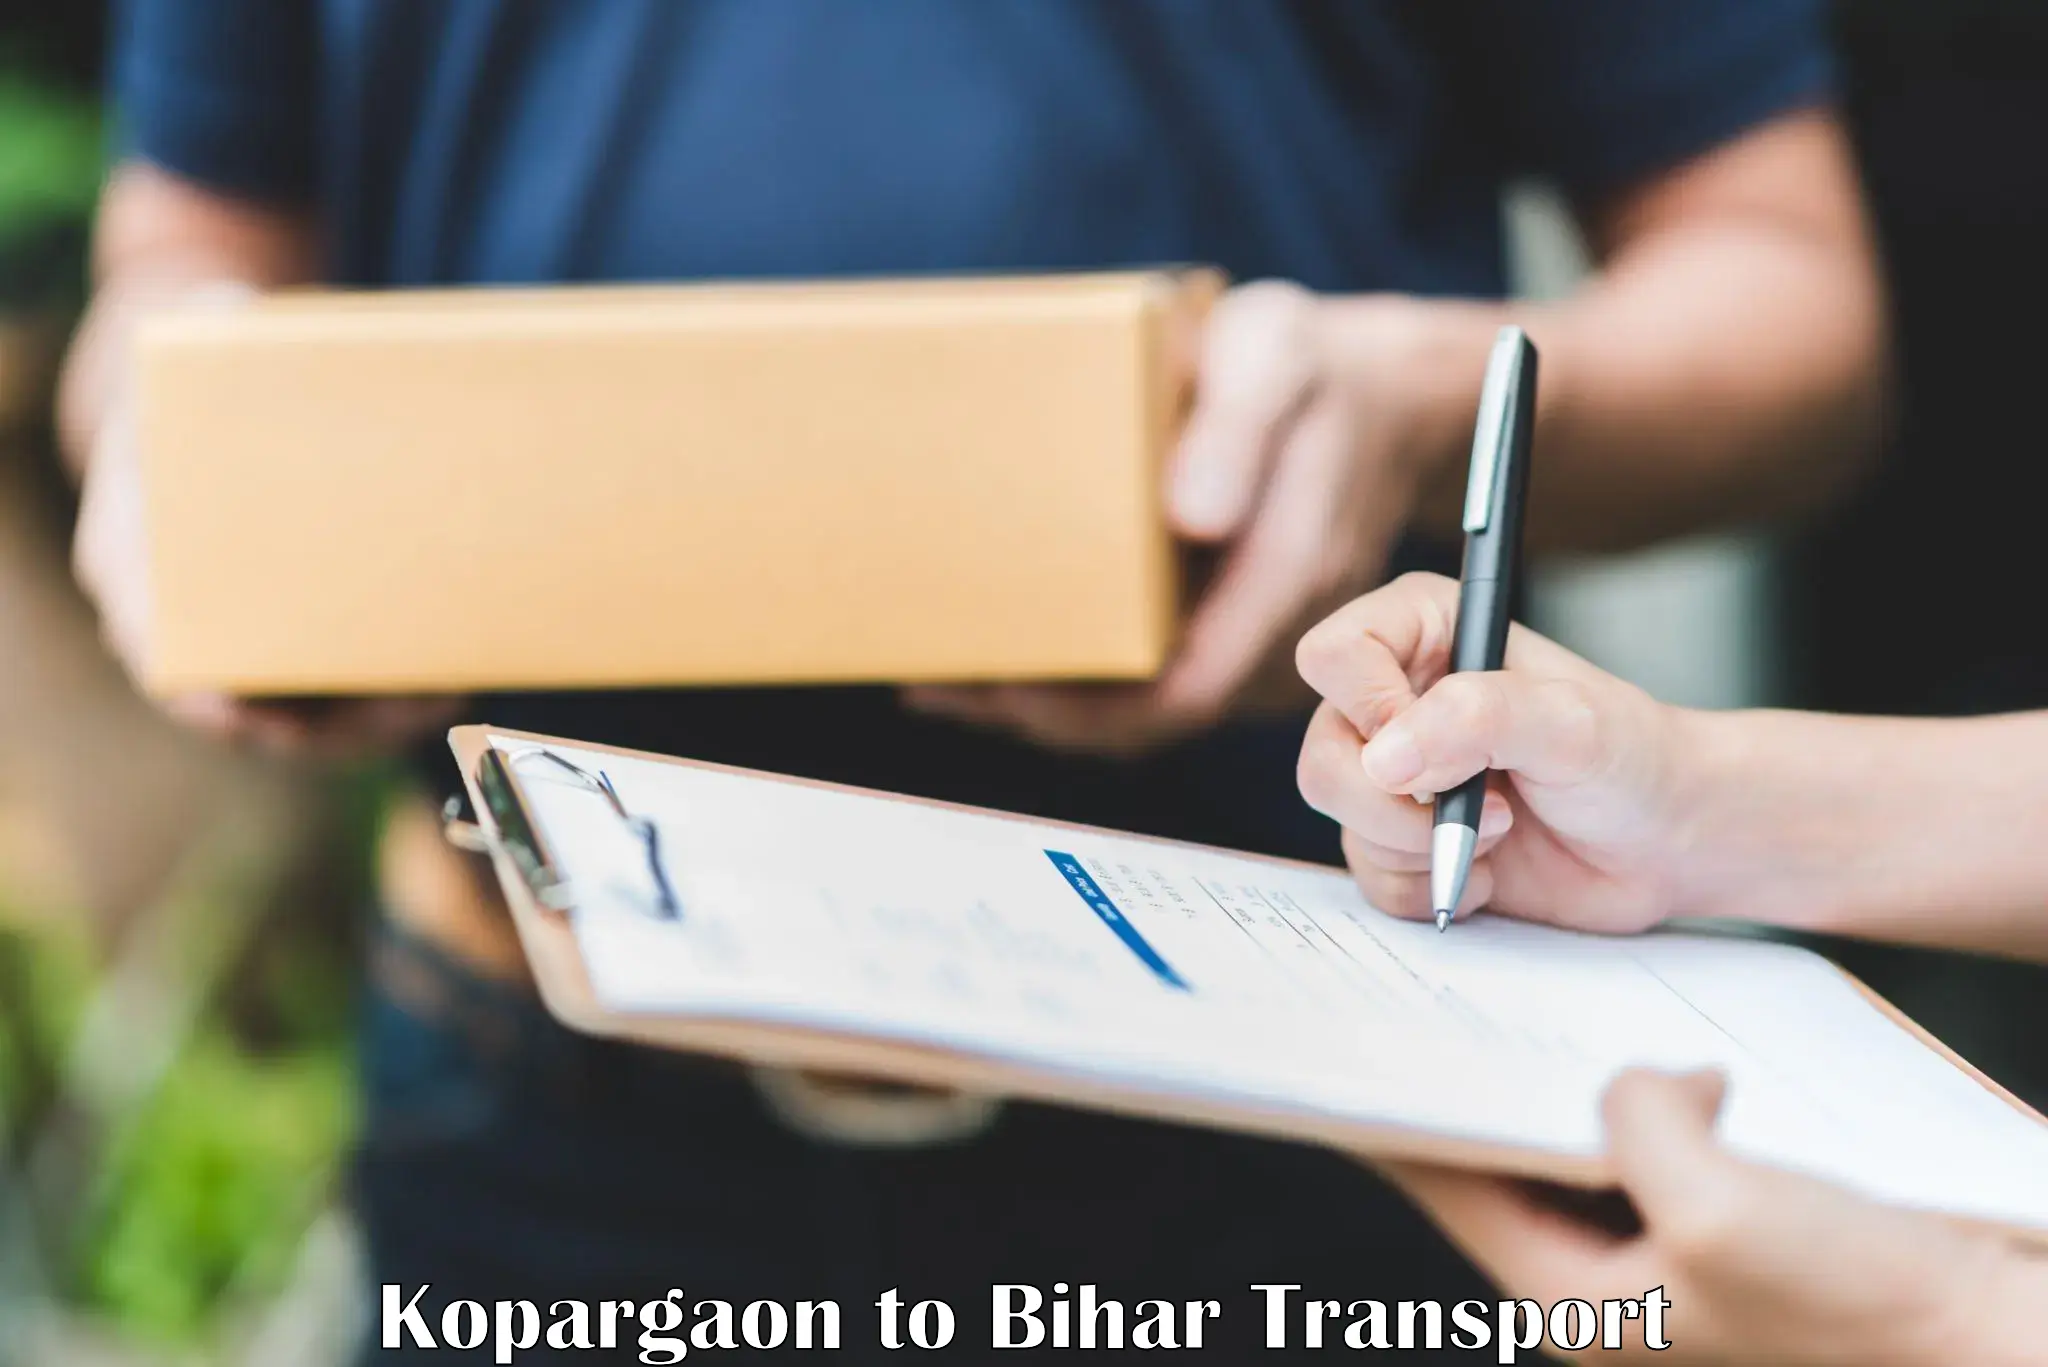 Transport bike from one state to another Kopargaon to Sultanganj